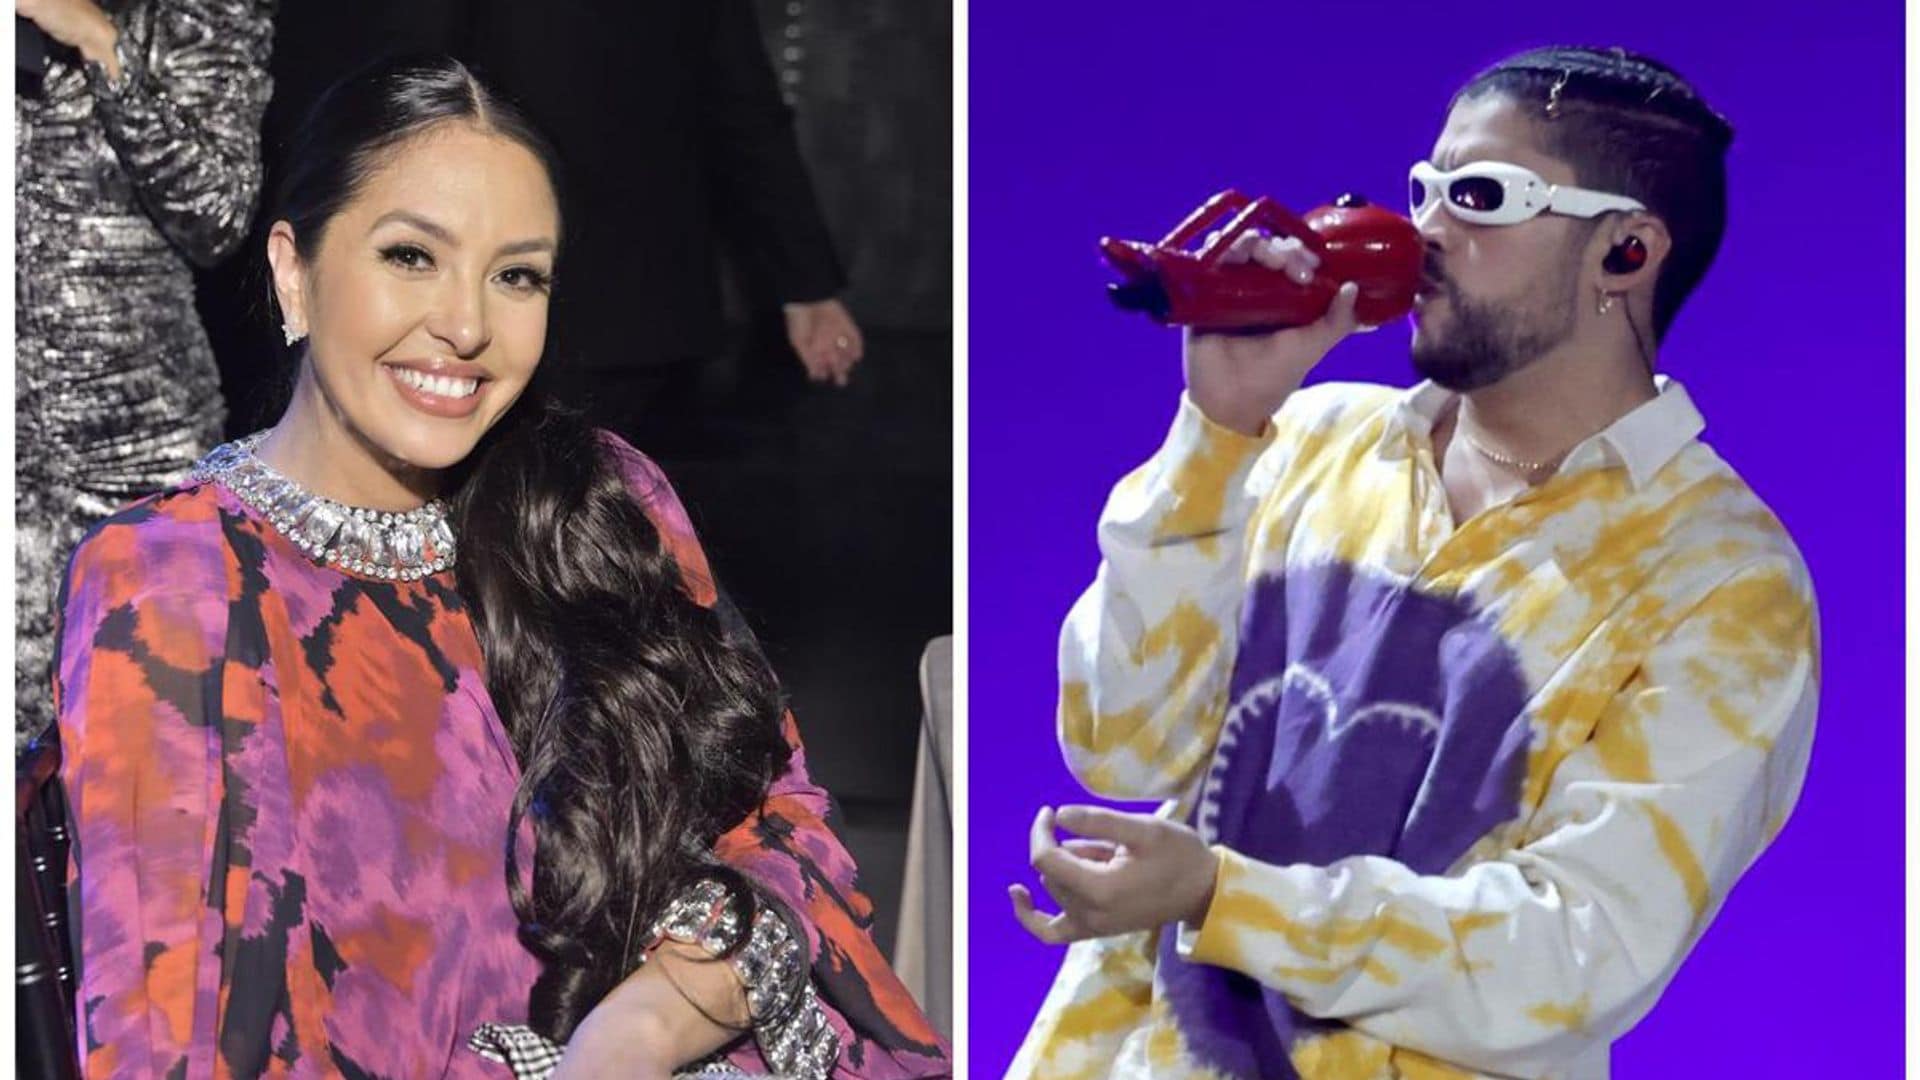 Vanessa Bryant and Candace Parker attends Bad Bunny’s concert in California